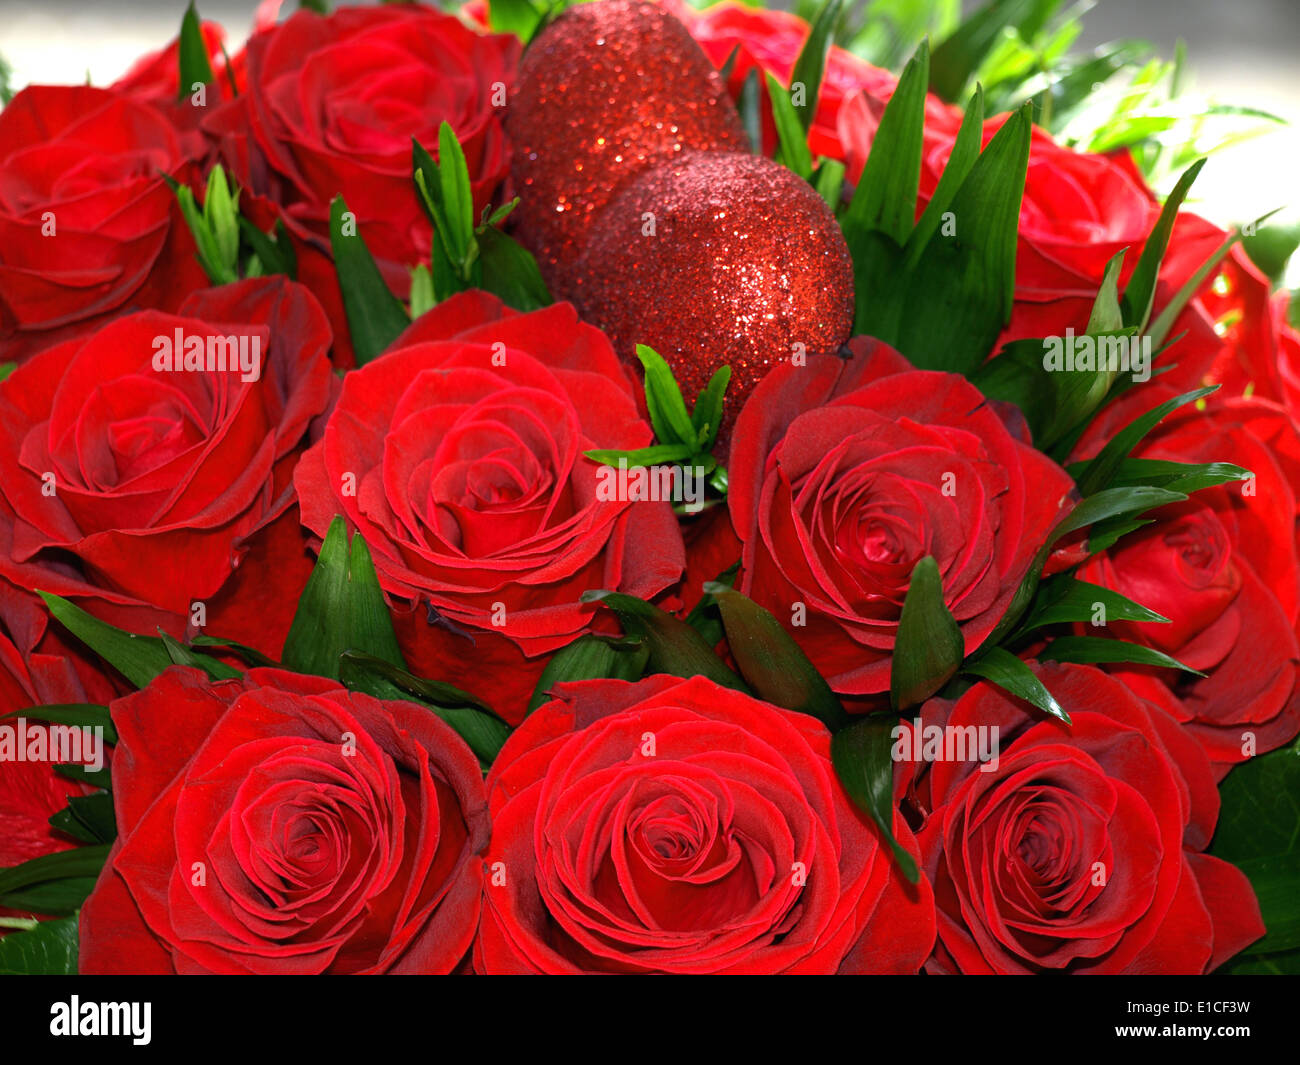 red roses for my love Stock Photo